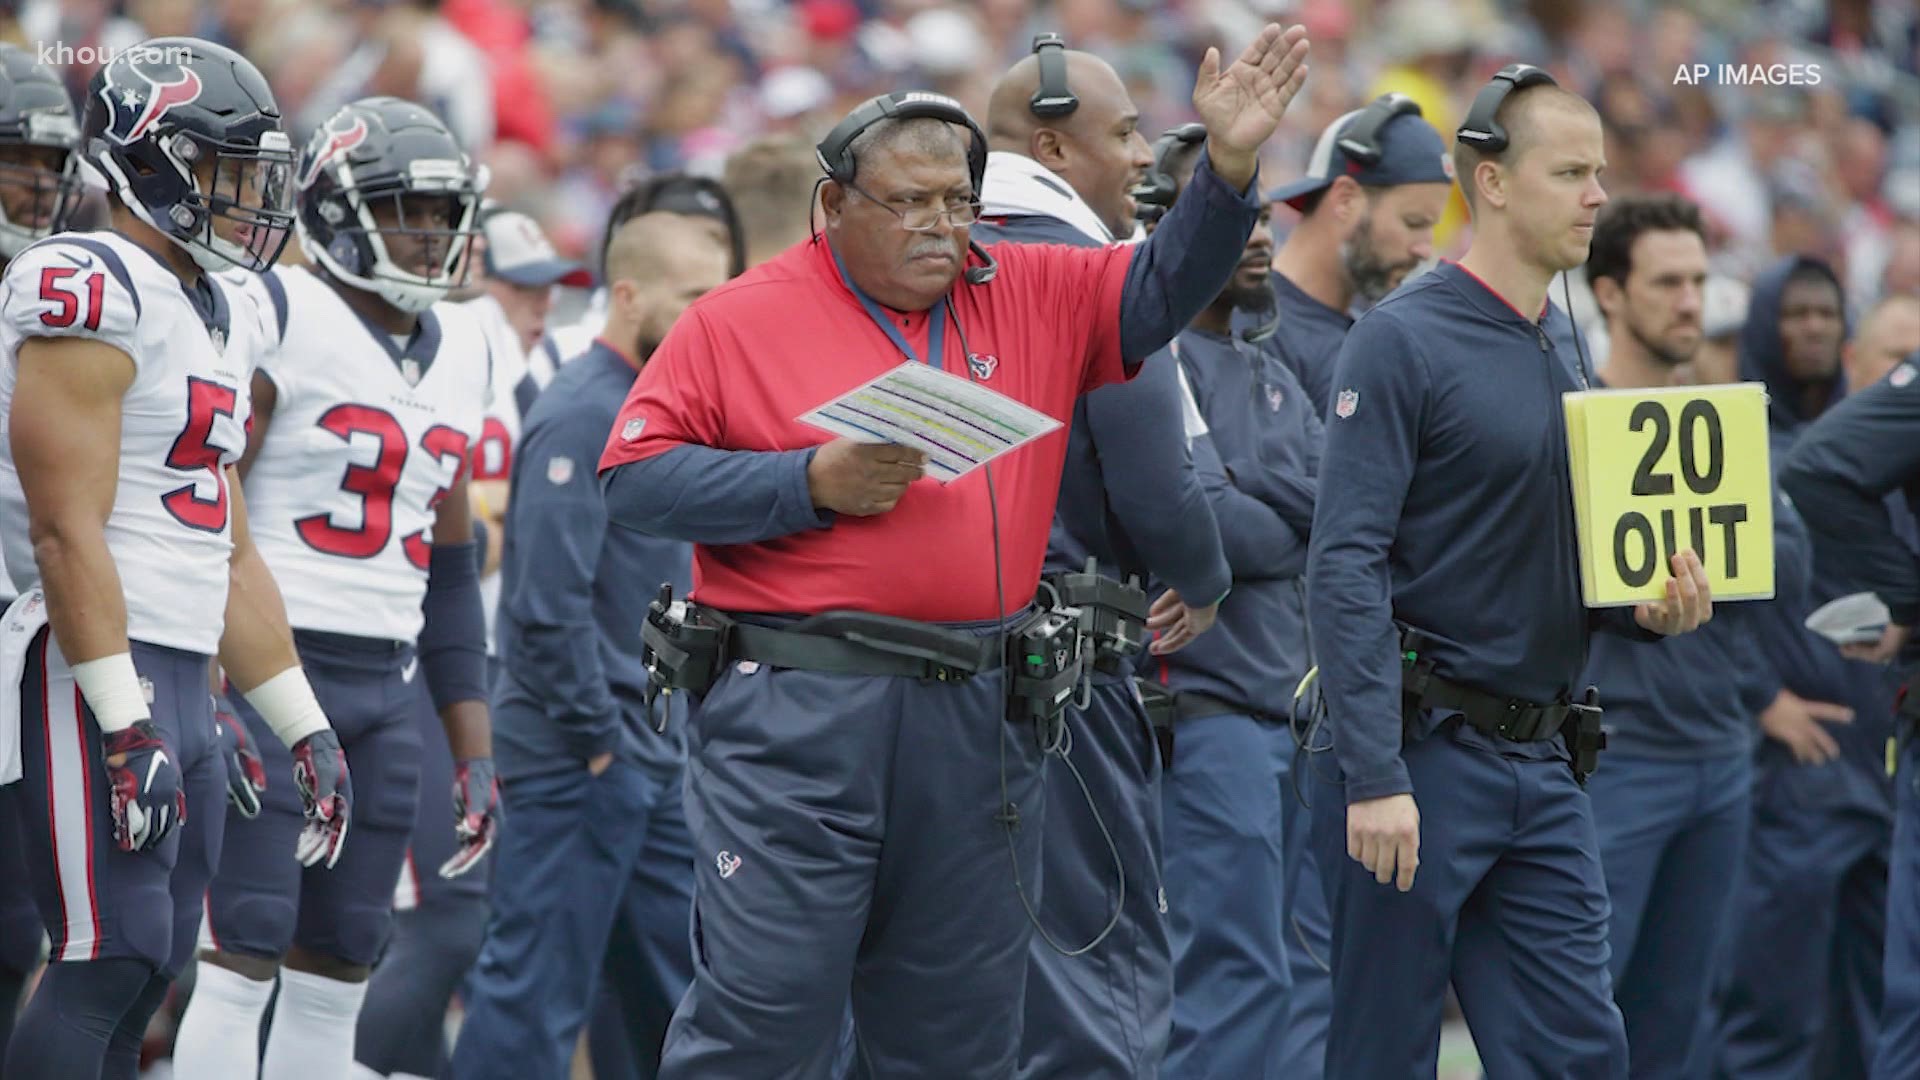 Interim Houston Texans head coach Romeo Crennel will be leading the team against the Jaguars this Sunday. Here's what we know about him.